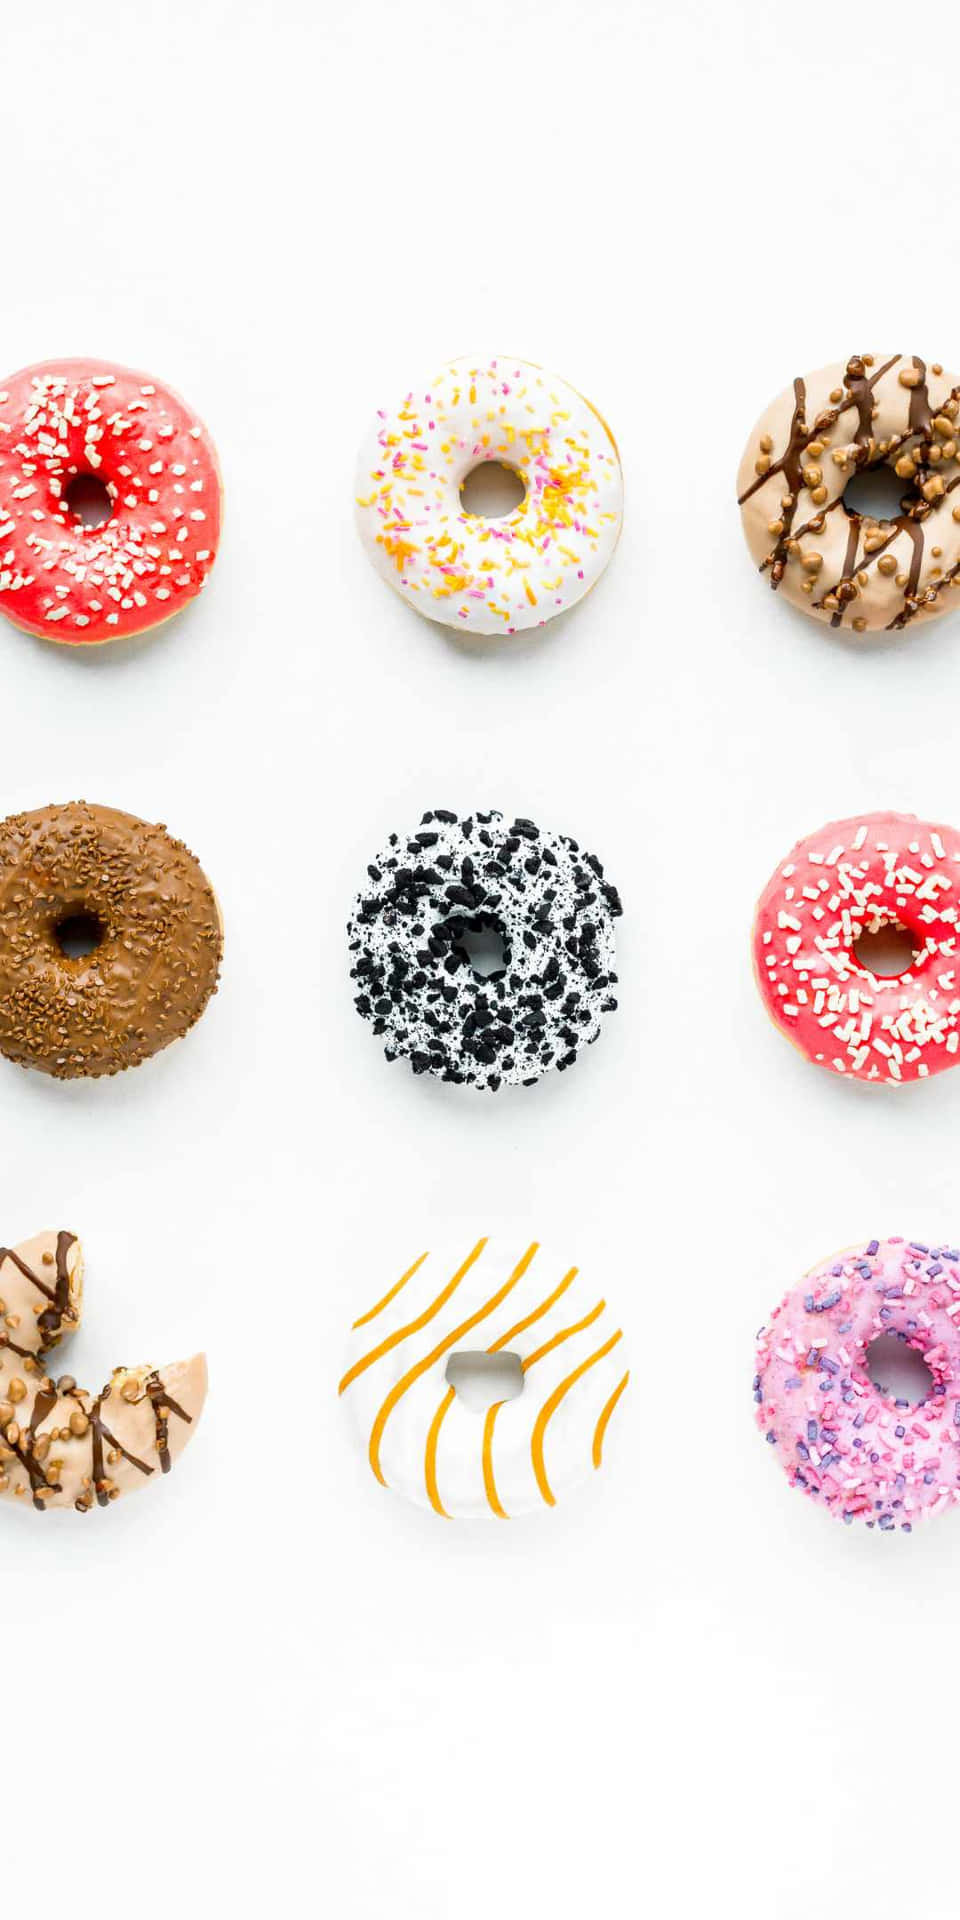 Pixel 3 Pastries Background Donuts Threes